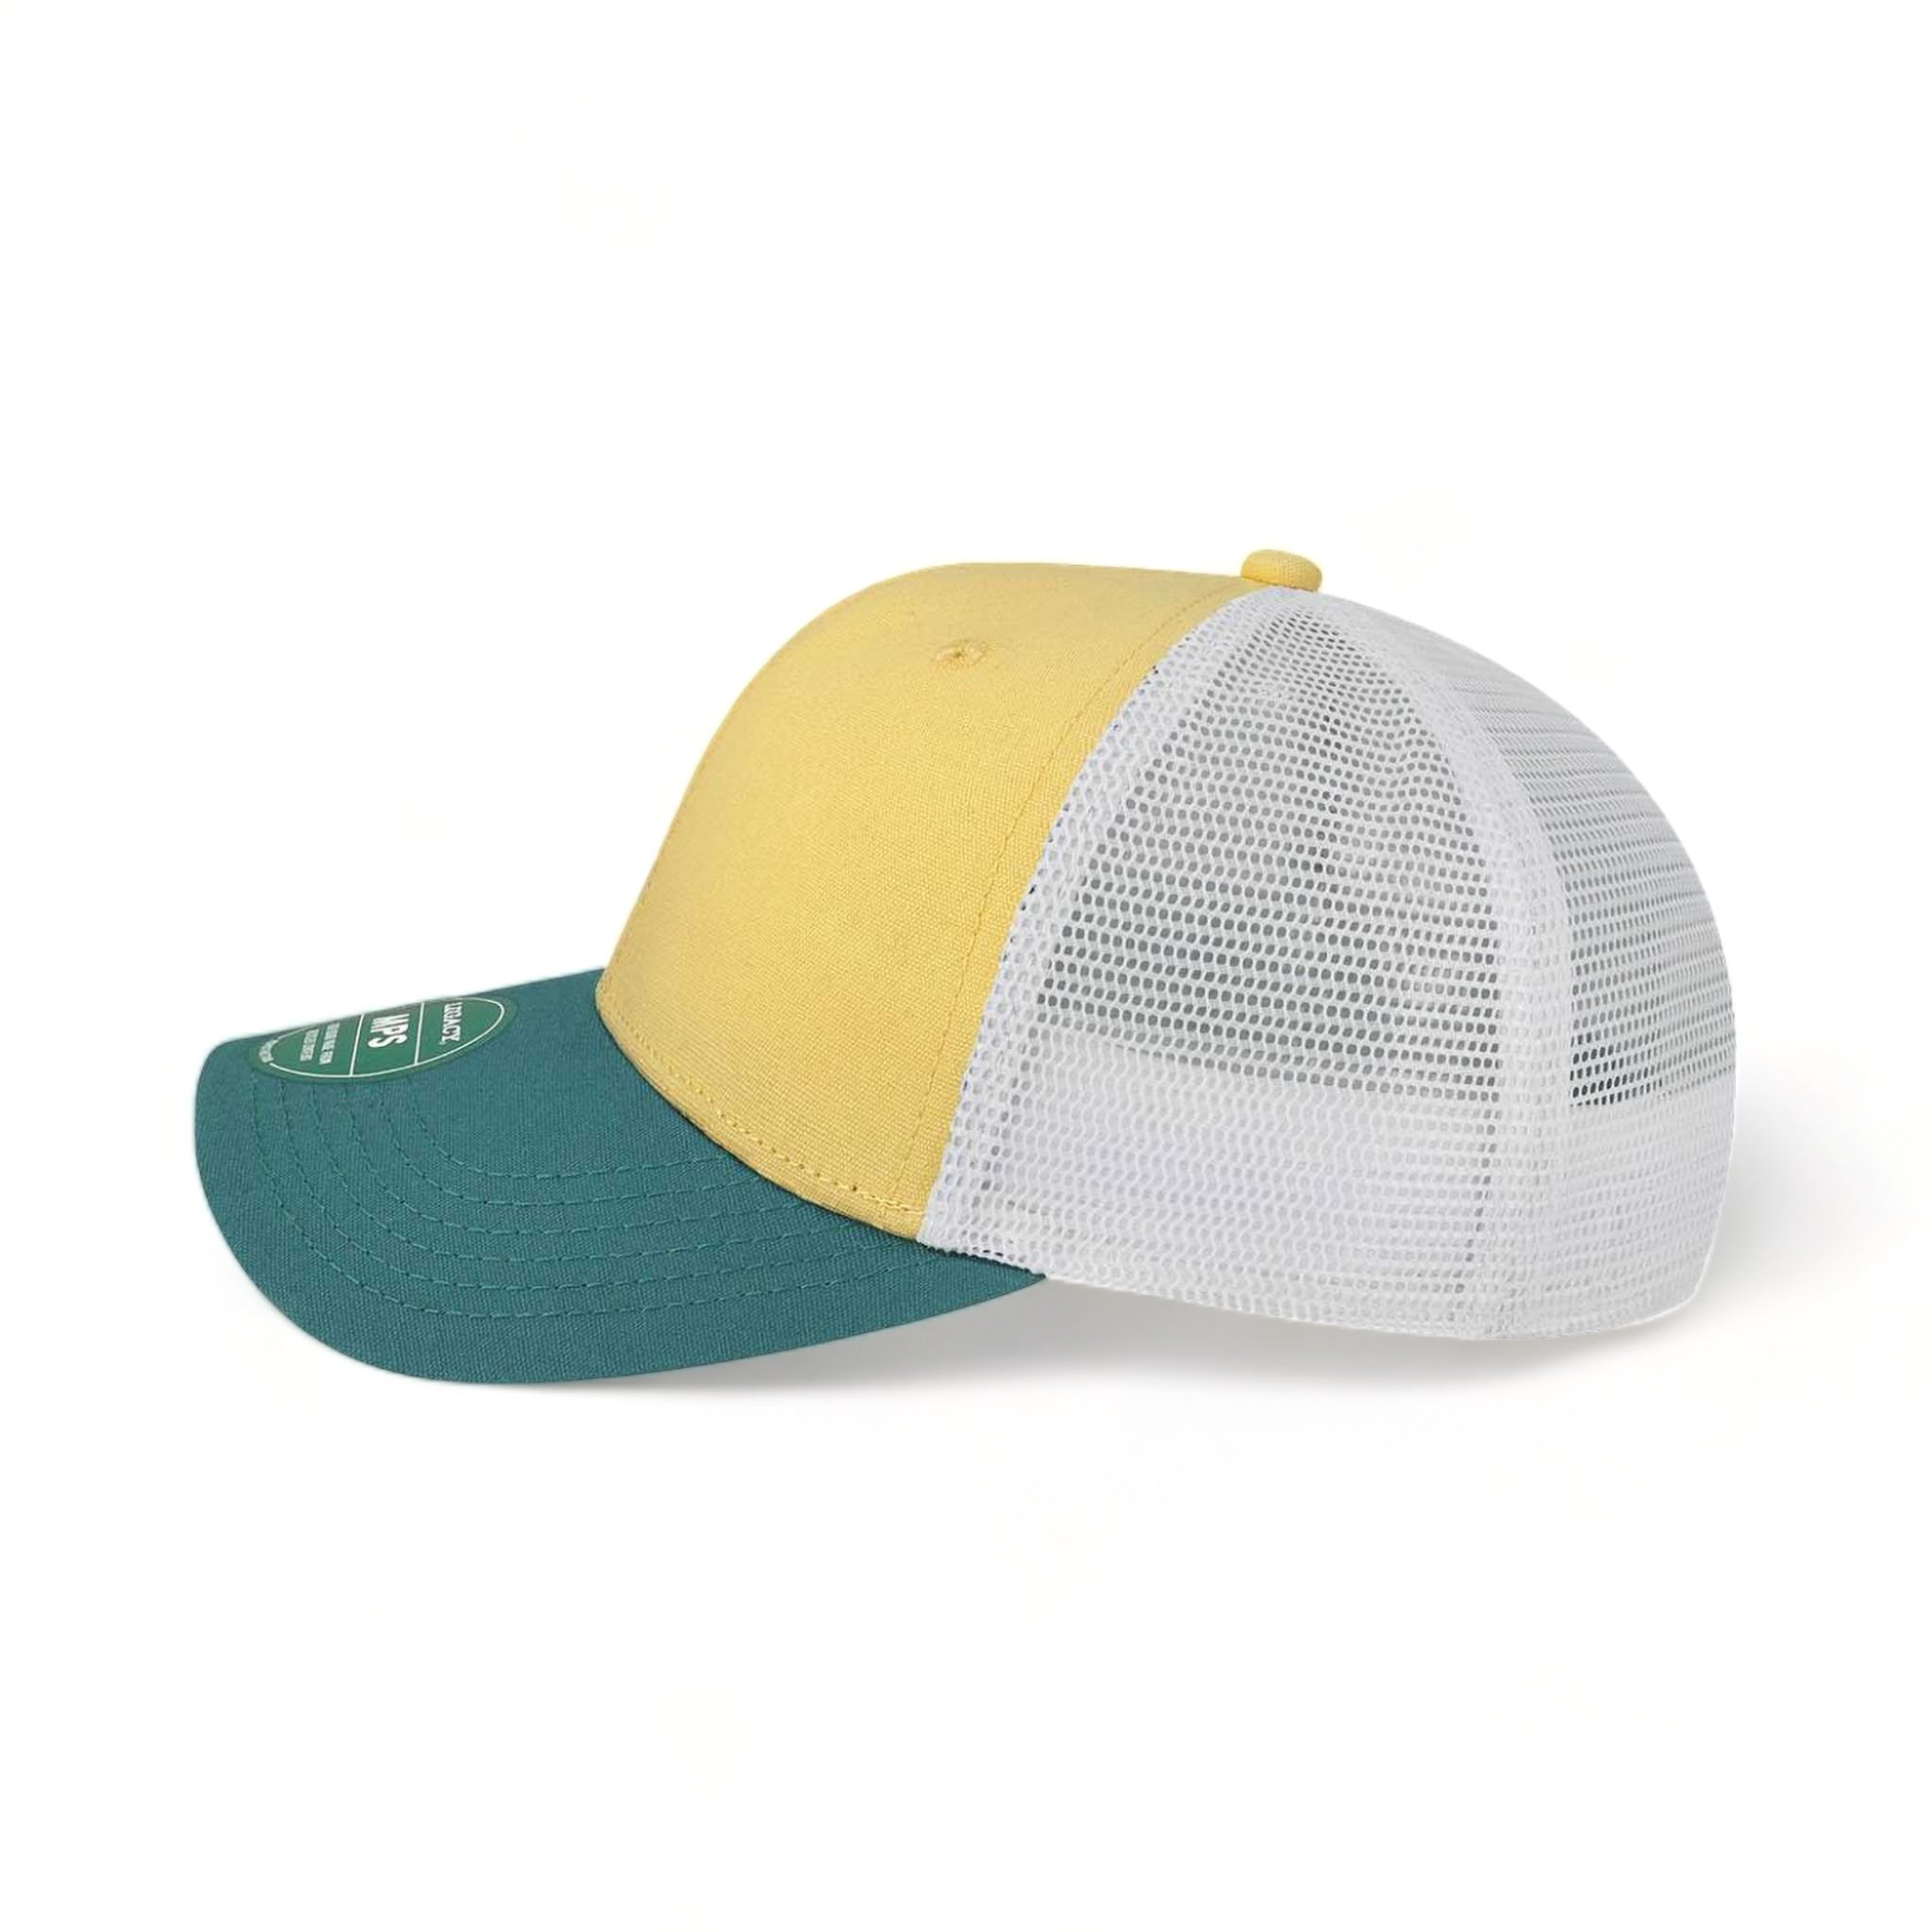 Side view of LEGACY MPS custom hat in yellow, marine and white